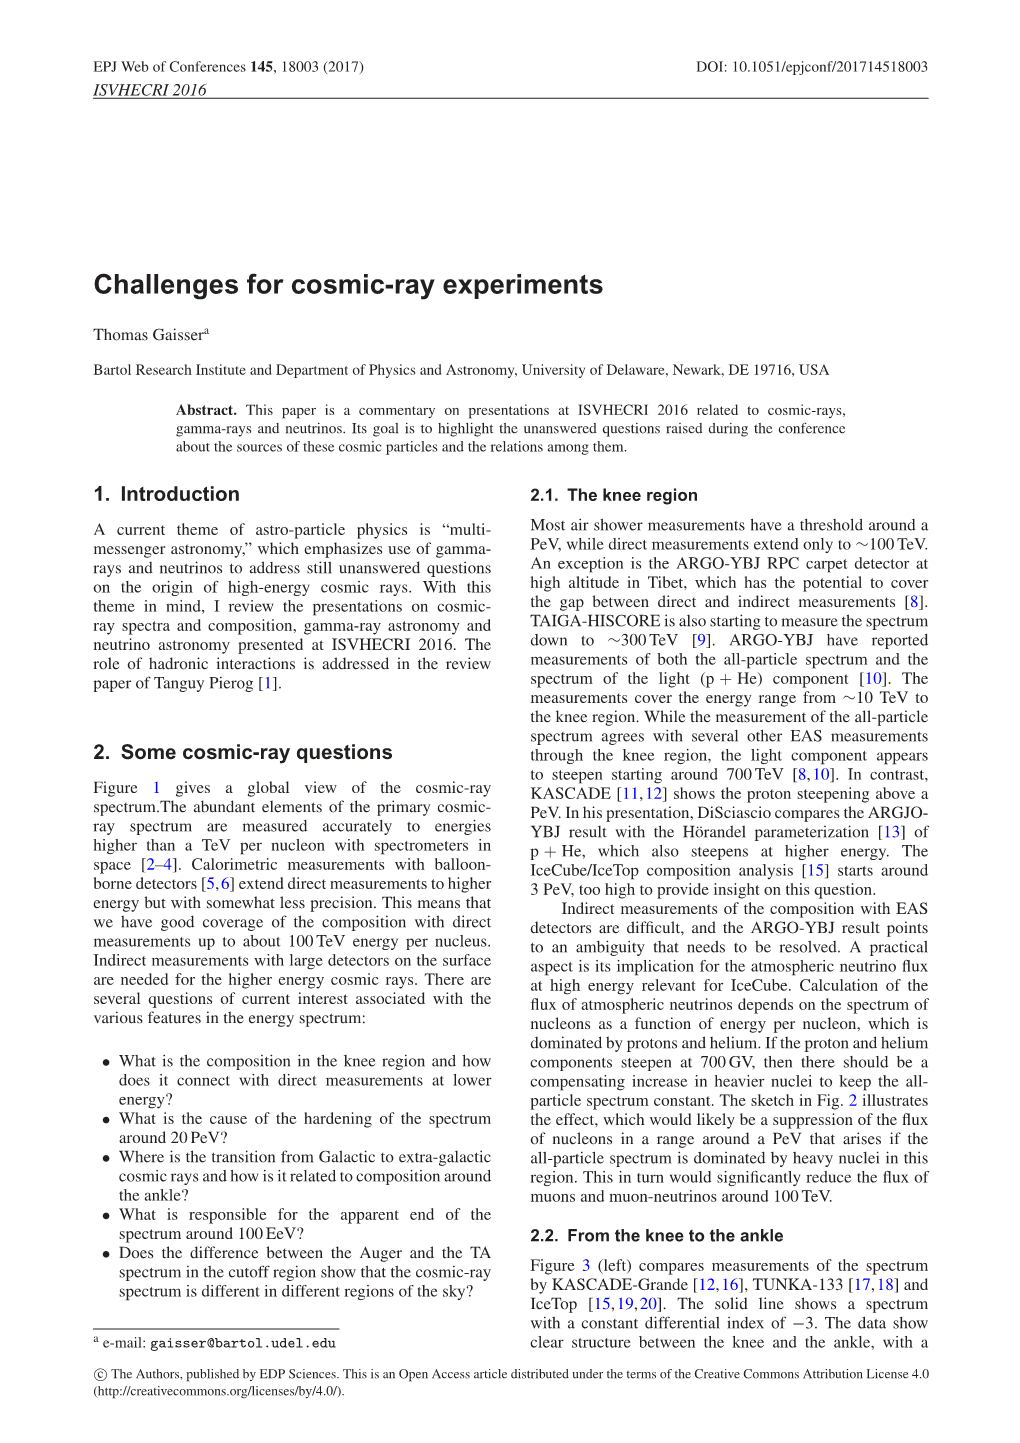 Challenges for Cosmic-Ray Experiments